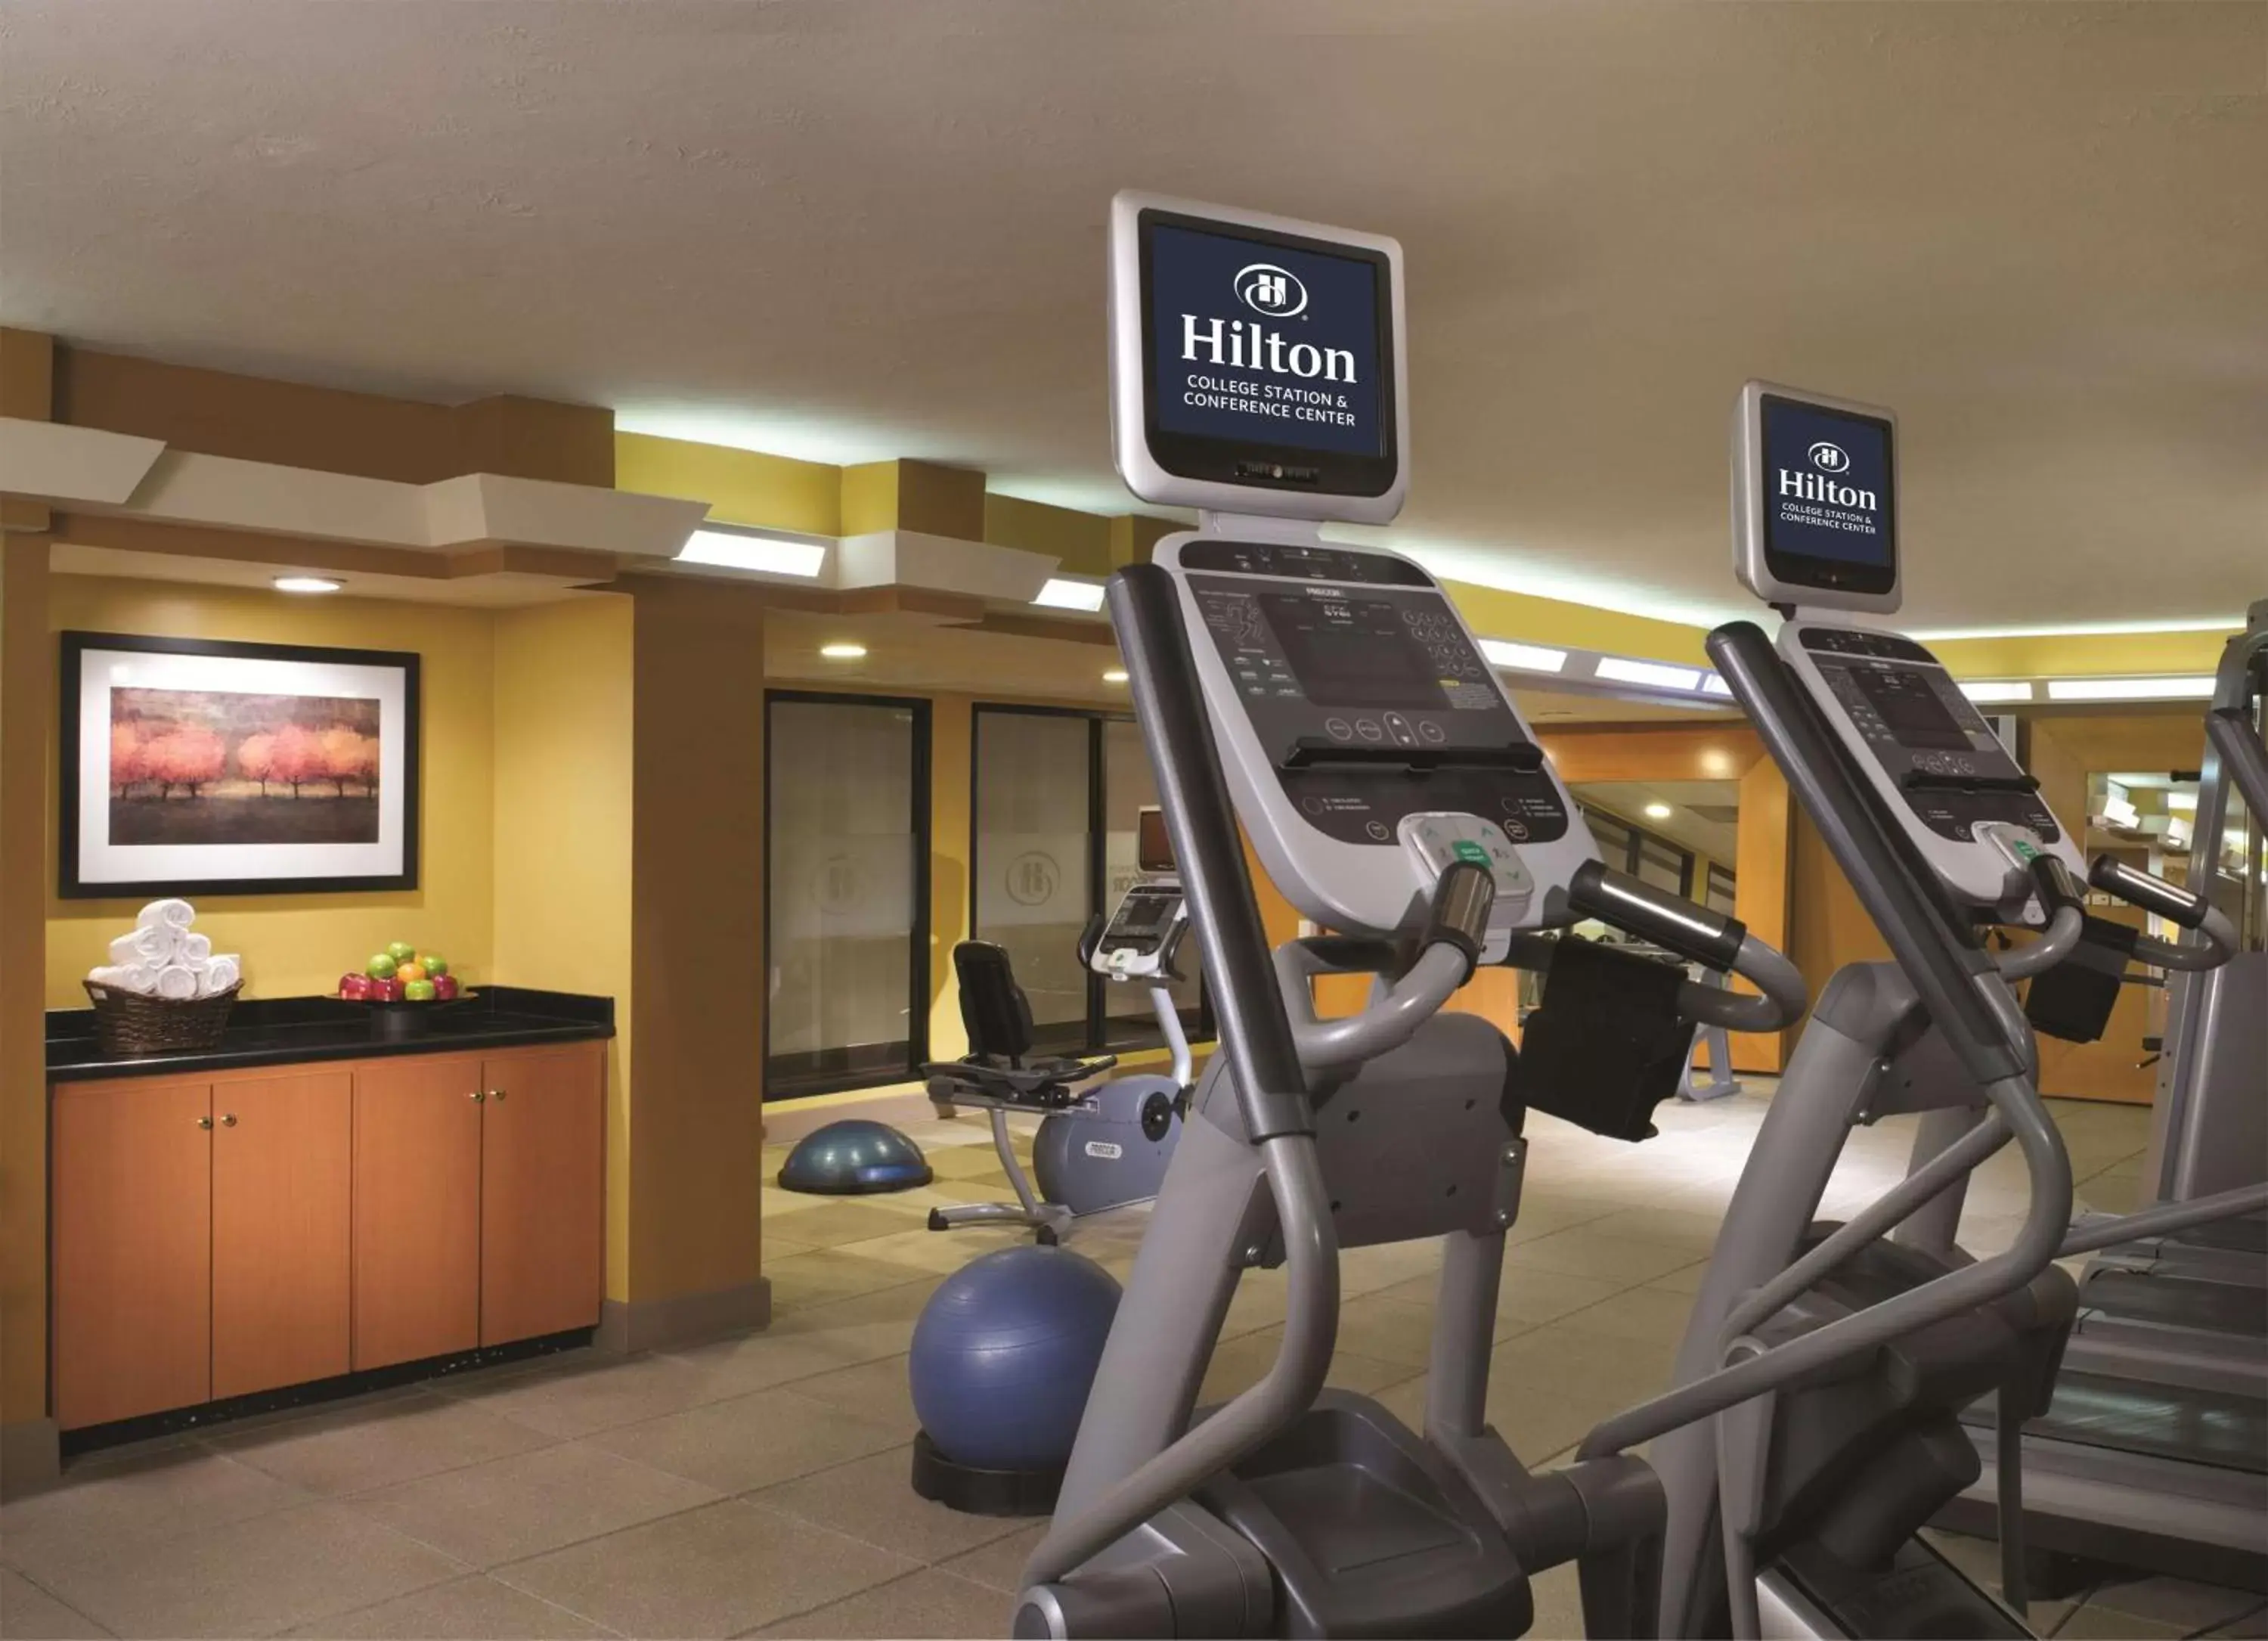 Fitness centre/facilities, Fitness Center/Facilities in Hilton College Station & Conference Center